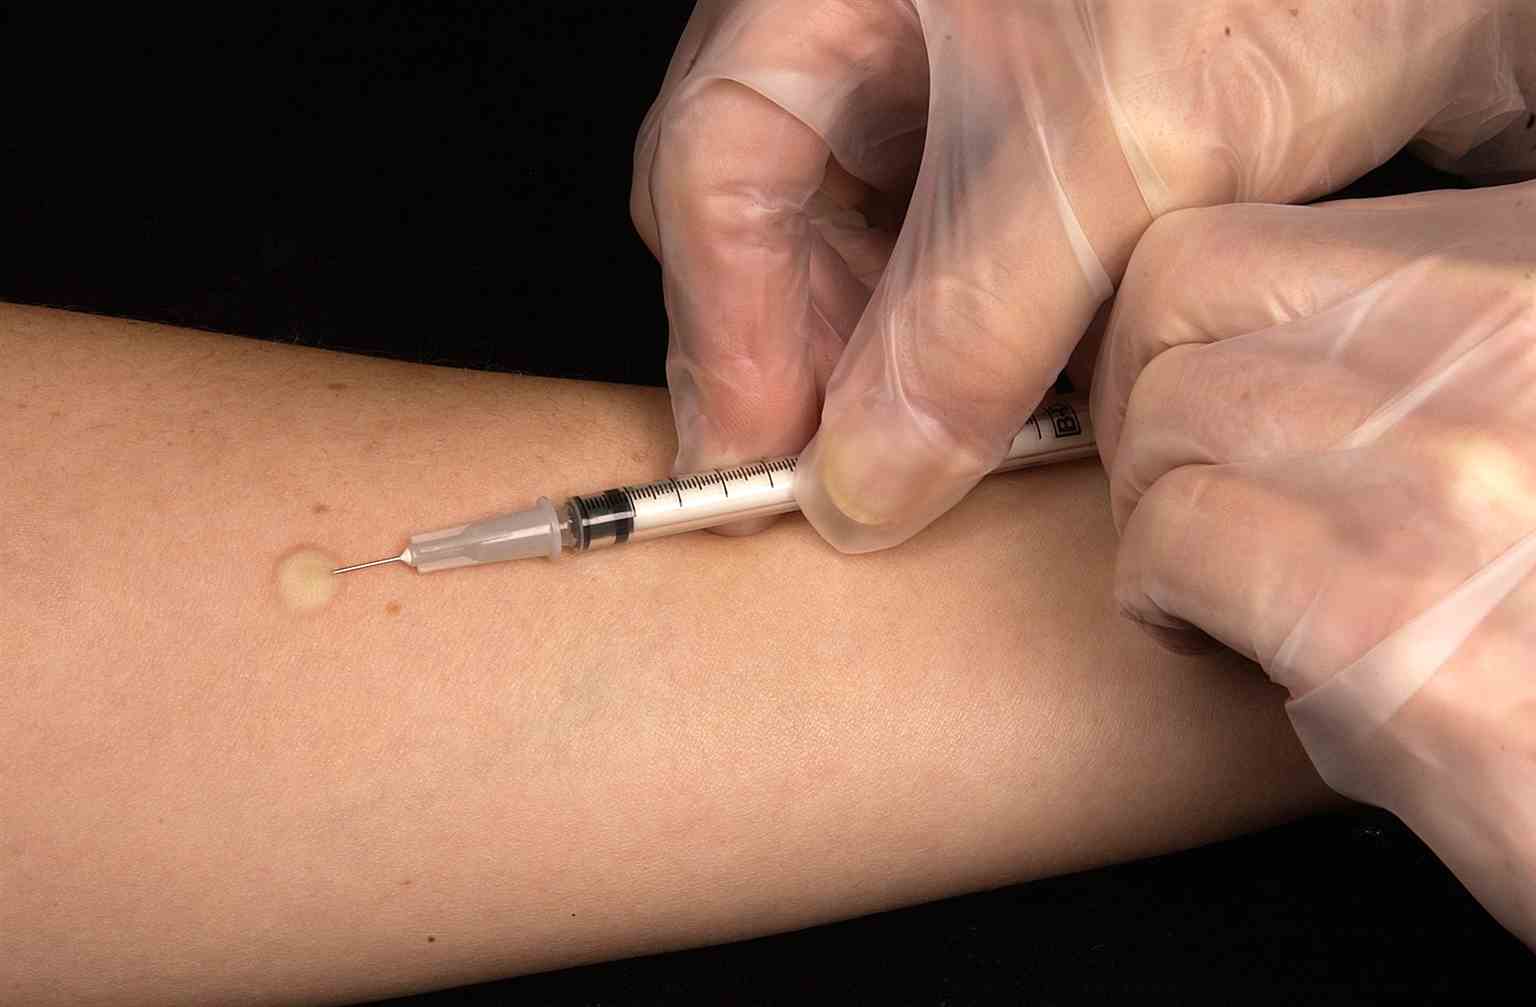 <p>This technician is in the process of correctly placing a Mantoux tuberculin skin test in this recipient&rsquo;s forearm, which will cause a 6mm to10mm wheal, i